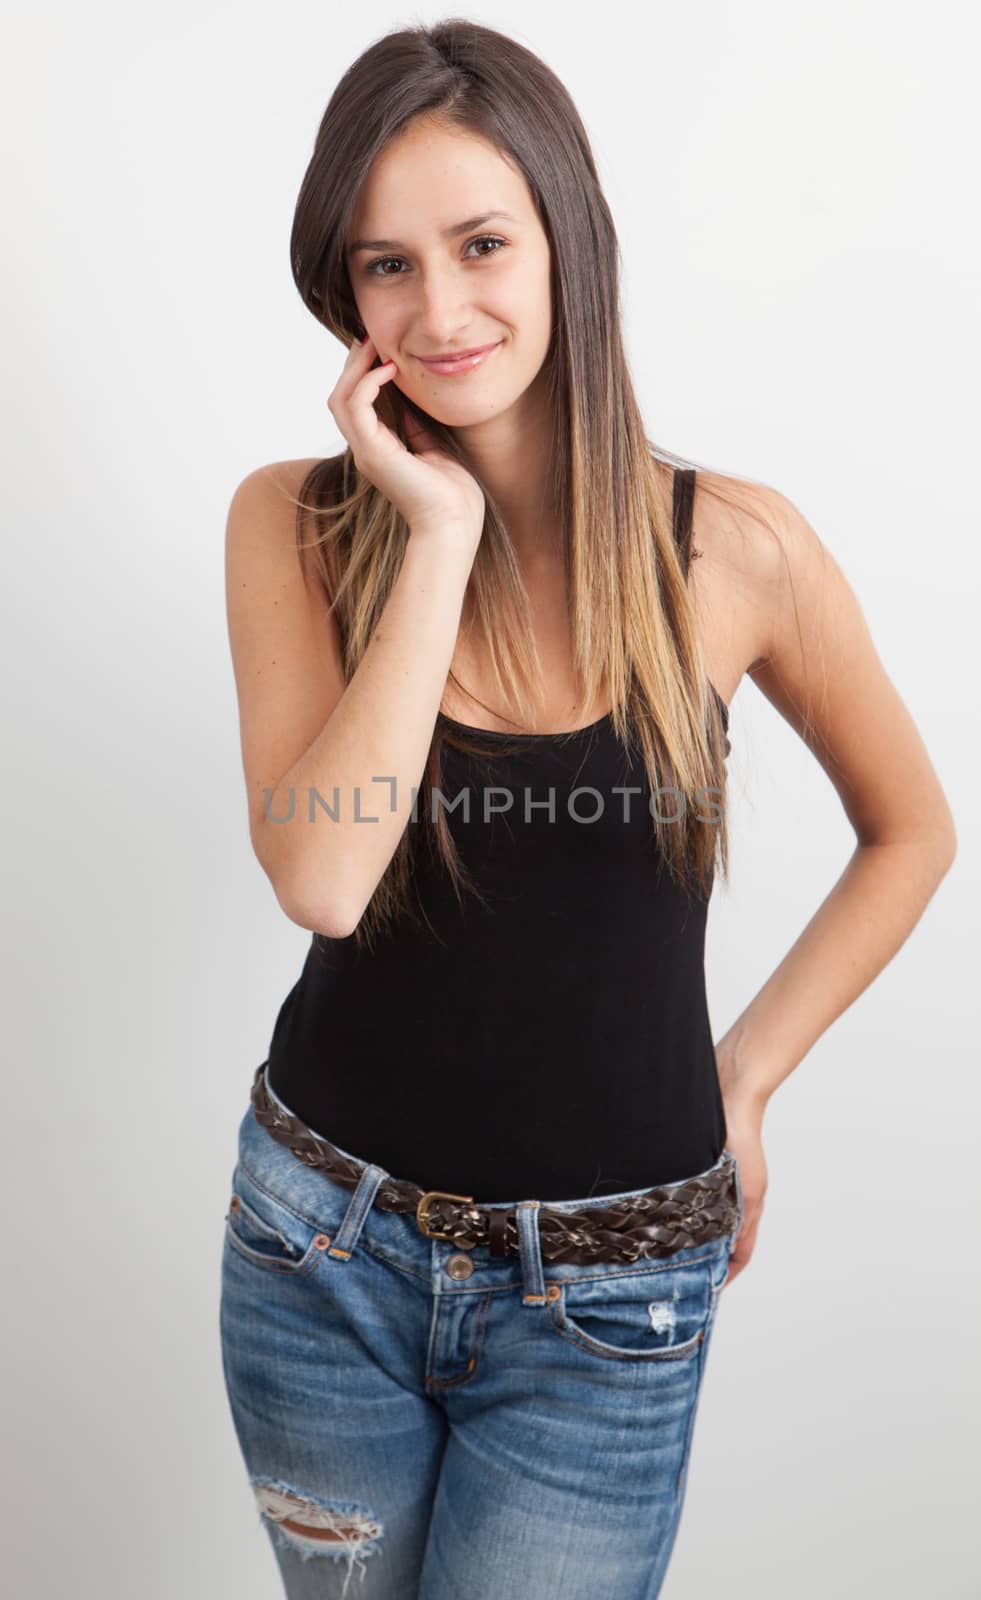 Young woman smiling by Izaphoto